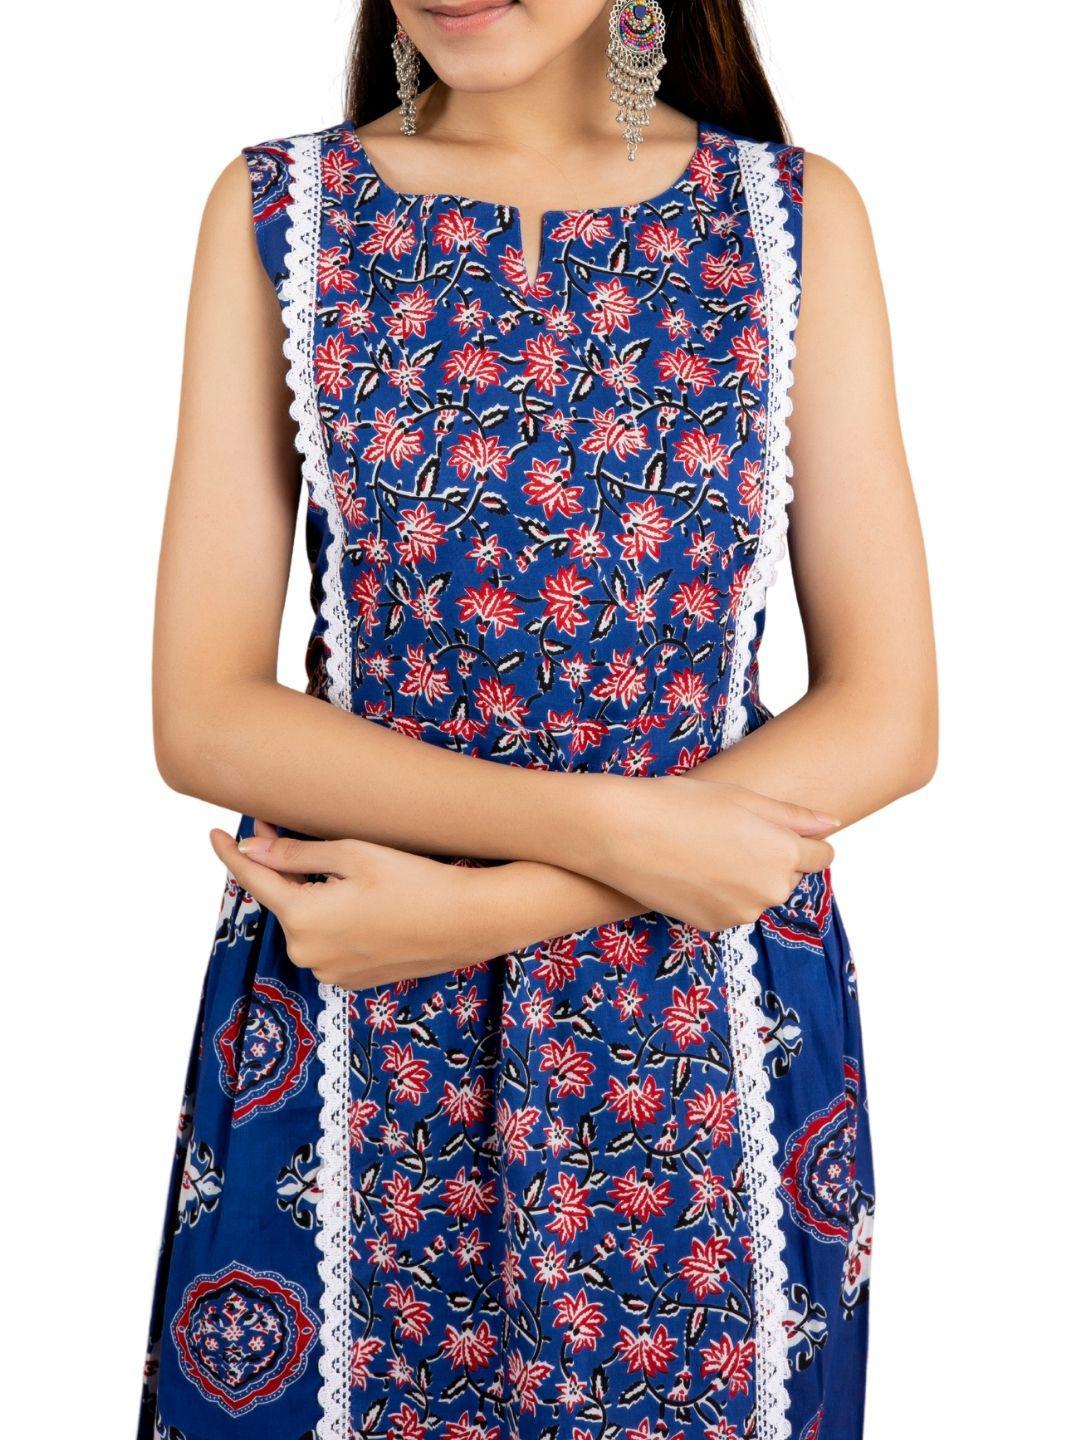 cotton-blue-red-floral-dress-10904022BL, Women Clothing, Cotton Dress, Cotton Blue-Red Floral Dress